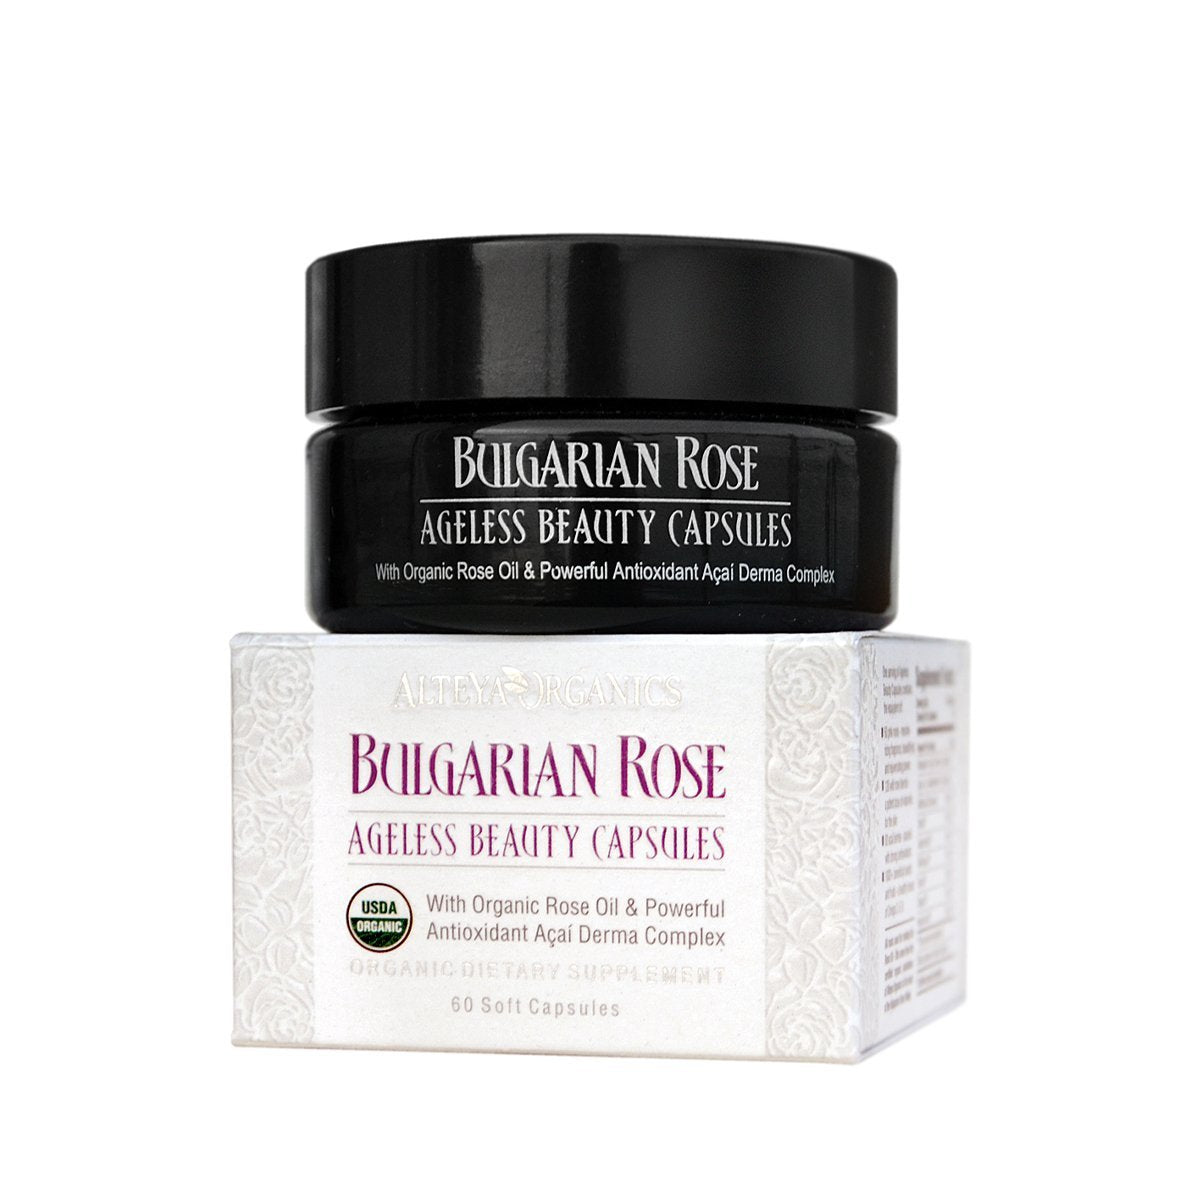 A jar of Bulgarian Rose Ageless Beauty Capsules enriched with antioxidant acai derma complex for reducing wrinkles and featuring organic rose oil from Alteya Organics.